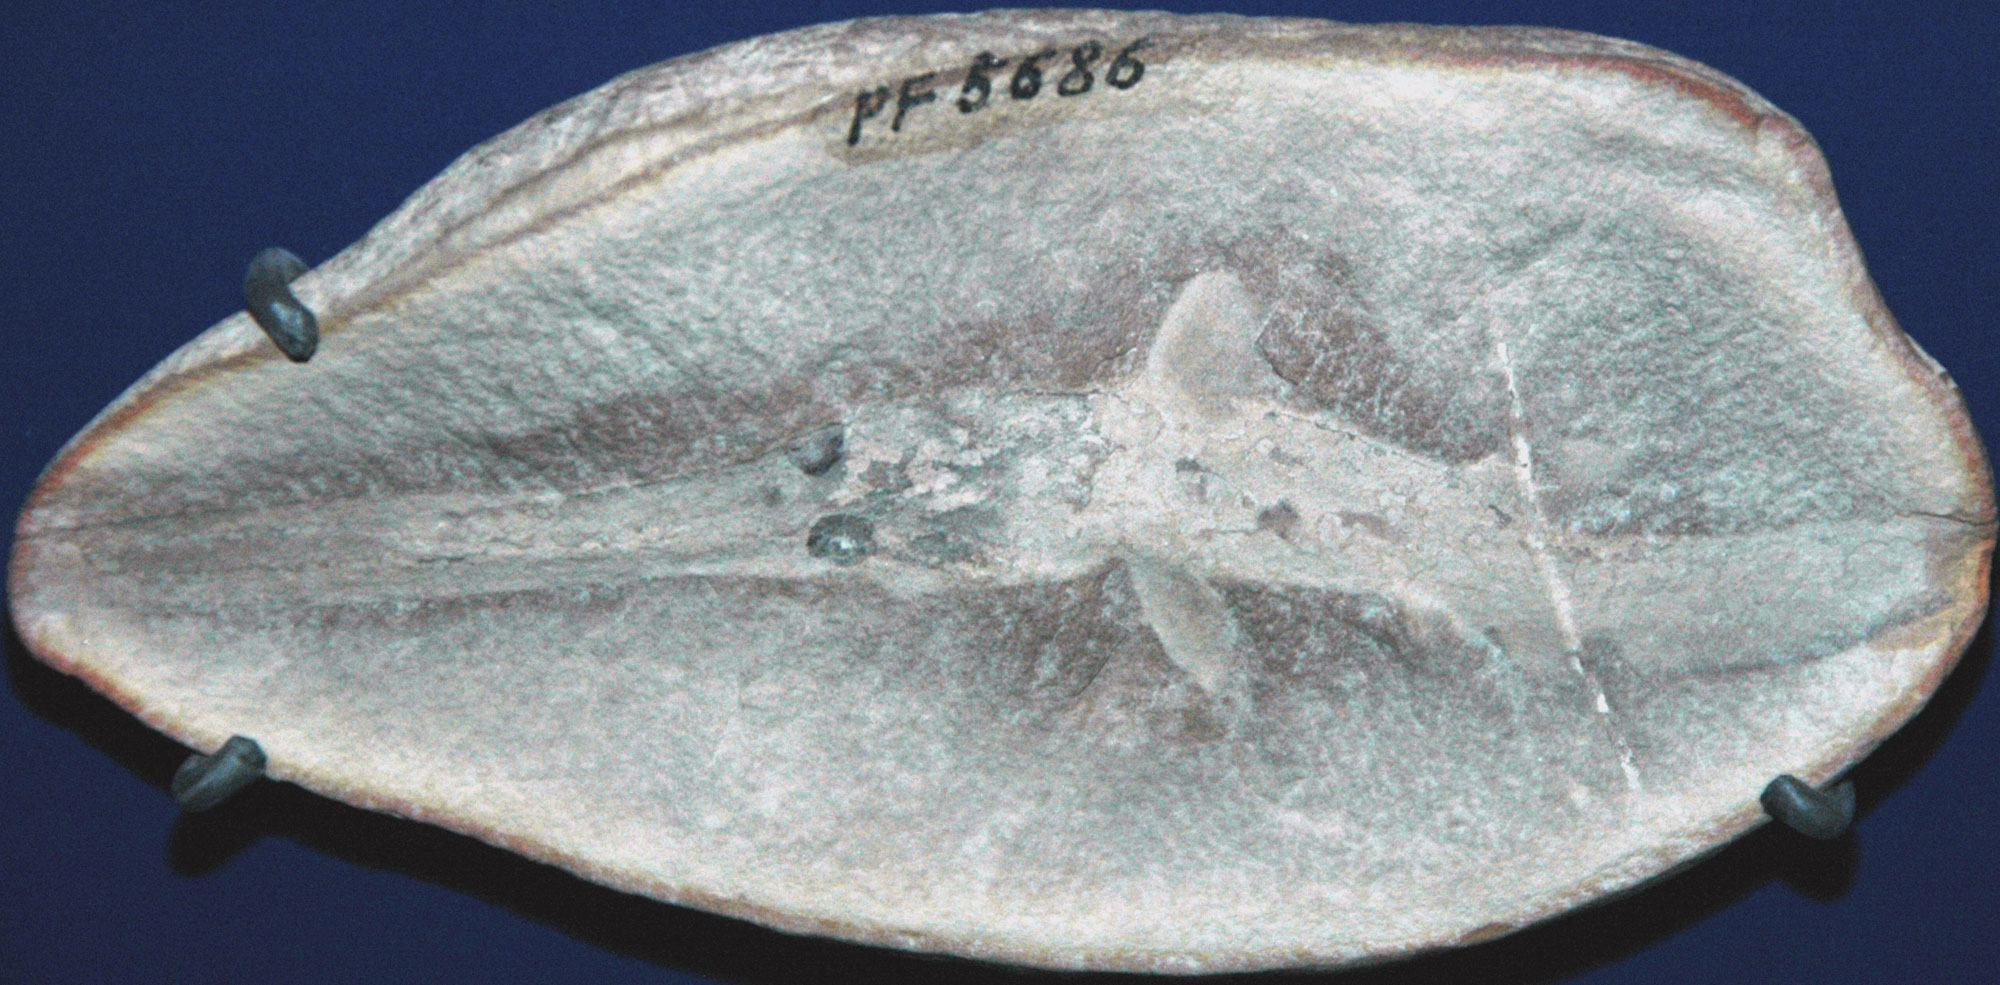 Photograph of a Mazon Creek nodule split in half to reveal the impression of a shark on one surface. The rock is grayish-white in color. The shark as a elongated snout and short pectoral fins. Two large eyes can be seen behind the snout.